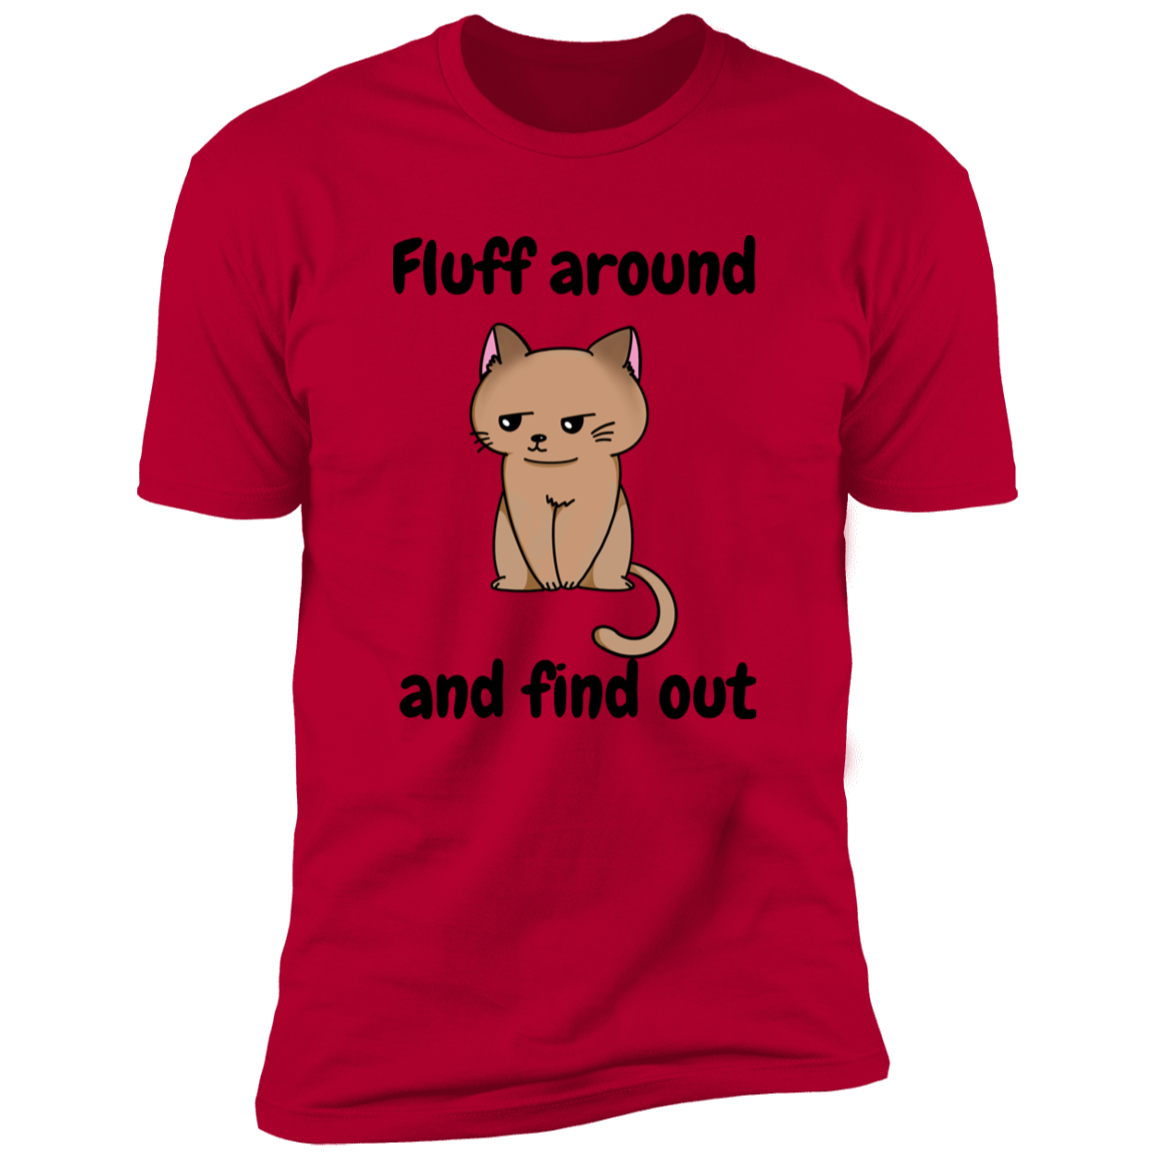 Fluff Around and Find Out Cat Shirt, funny cat shirt, funny cat shirt for humans, in red